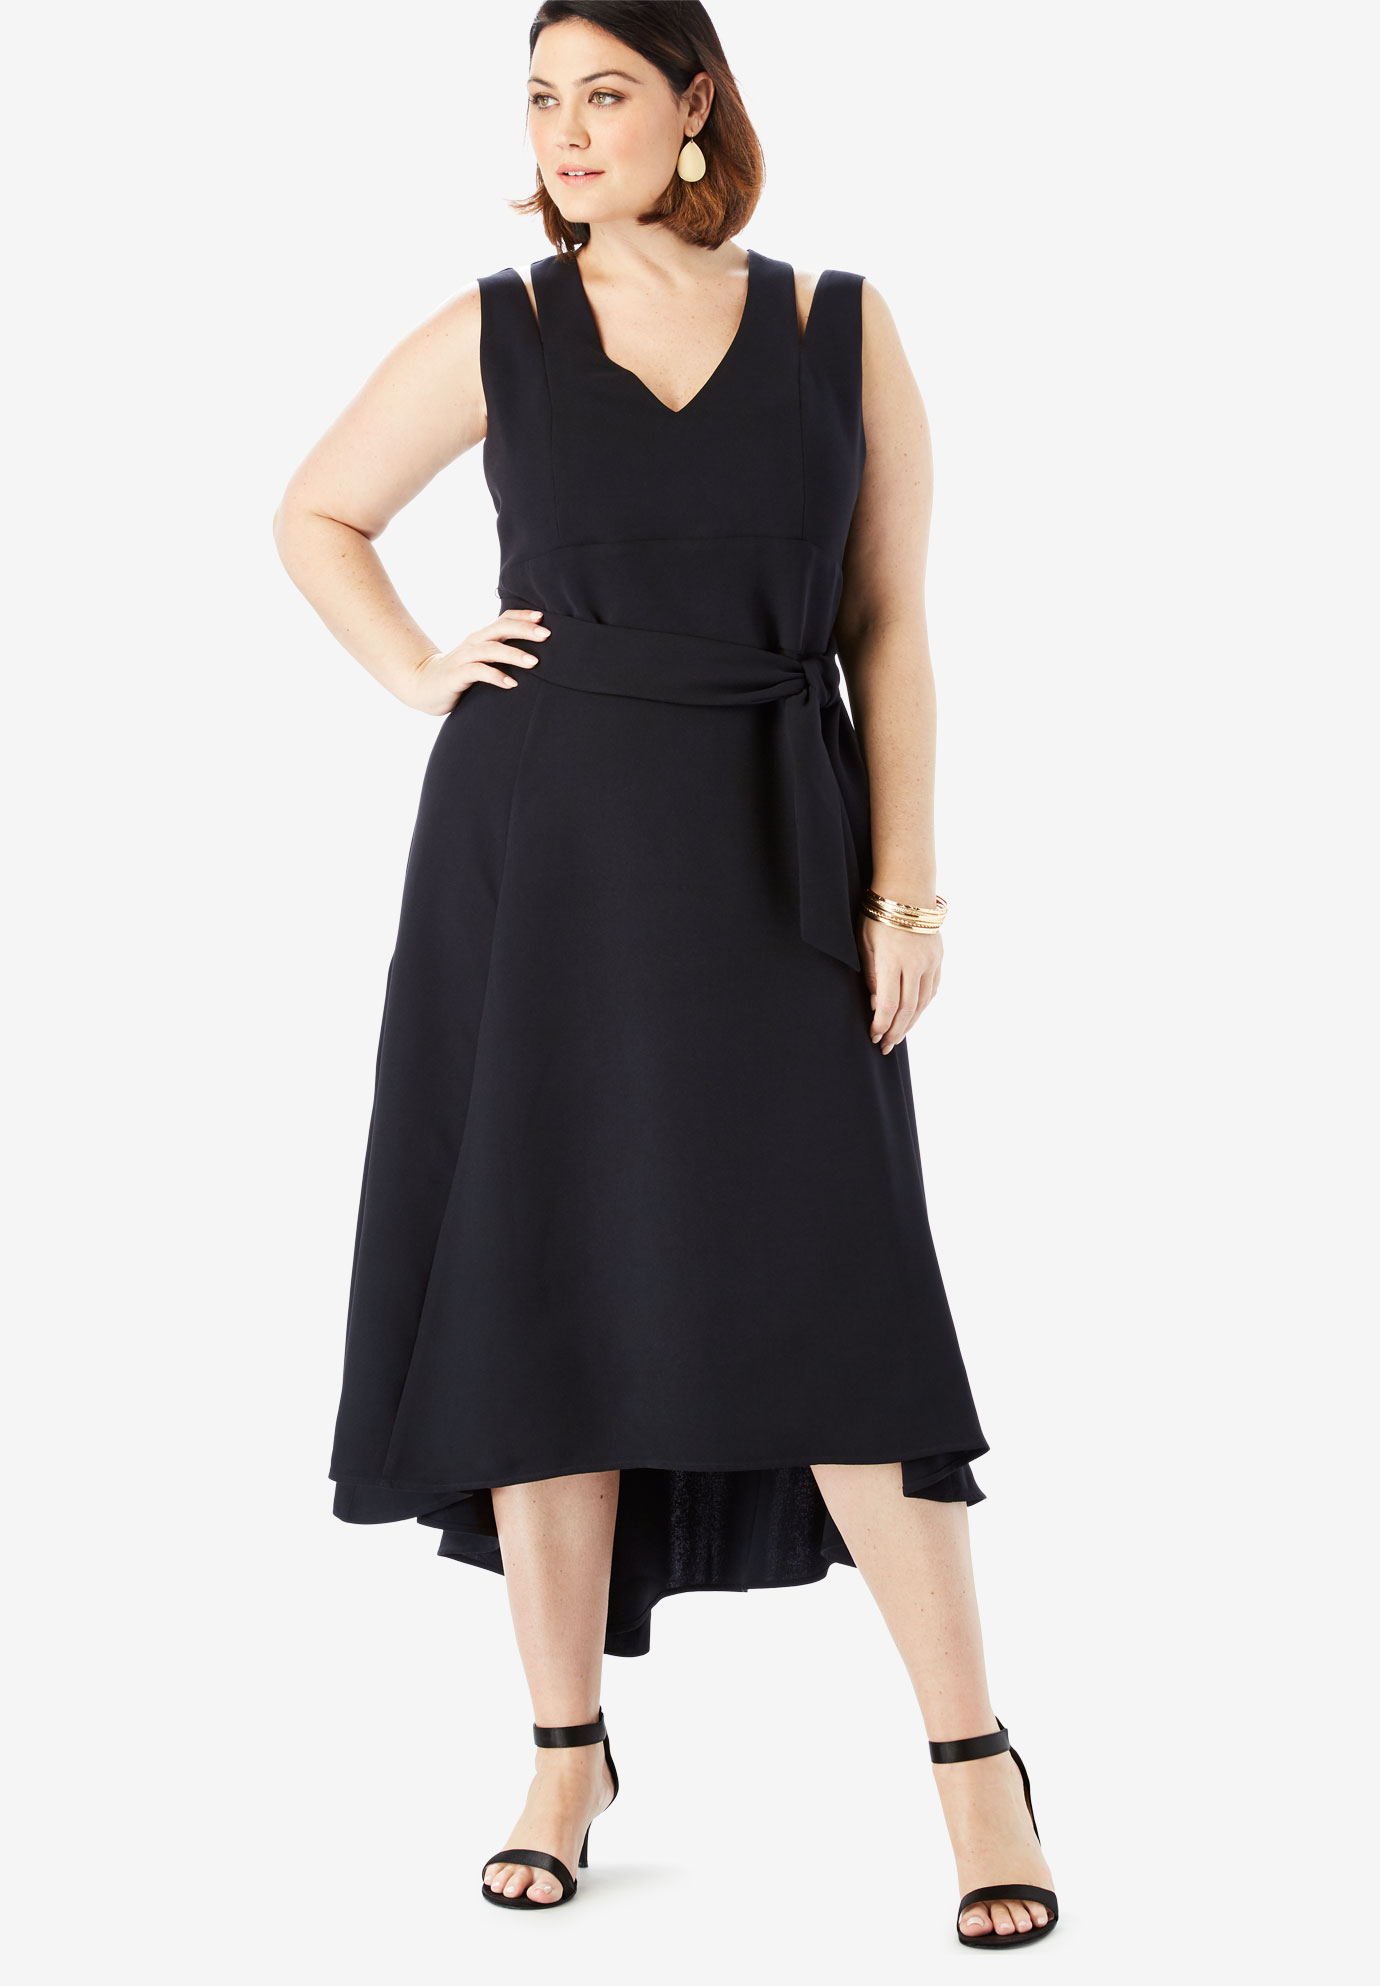 Sleeveless Fit & Flare Dress with High-Low Hem | Fullbeauty Outlet